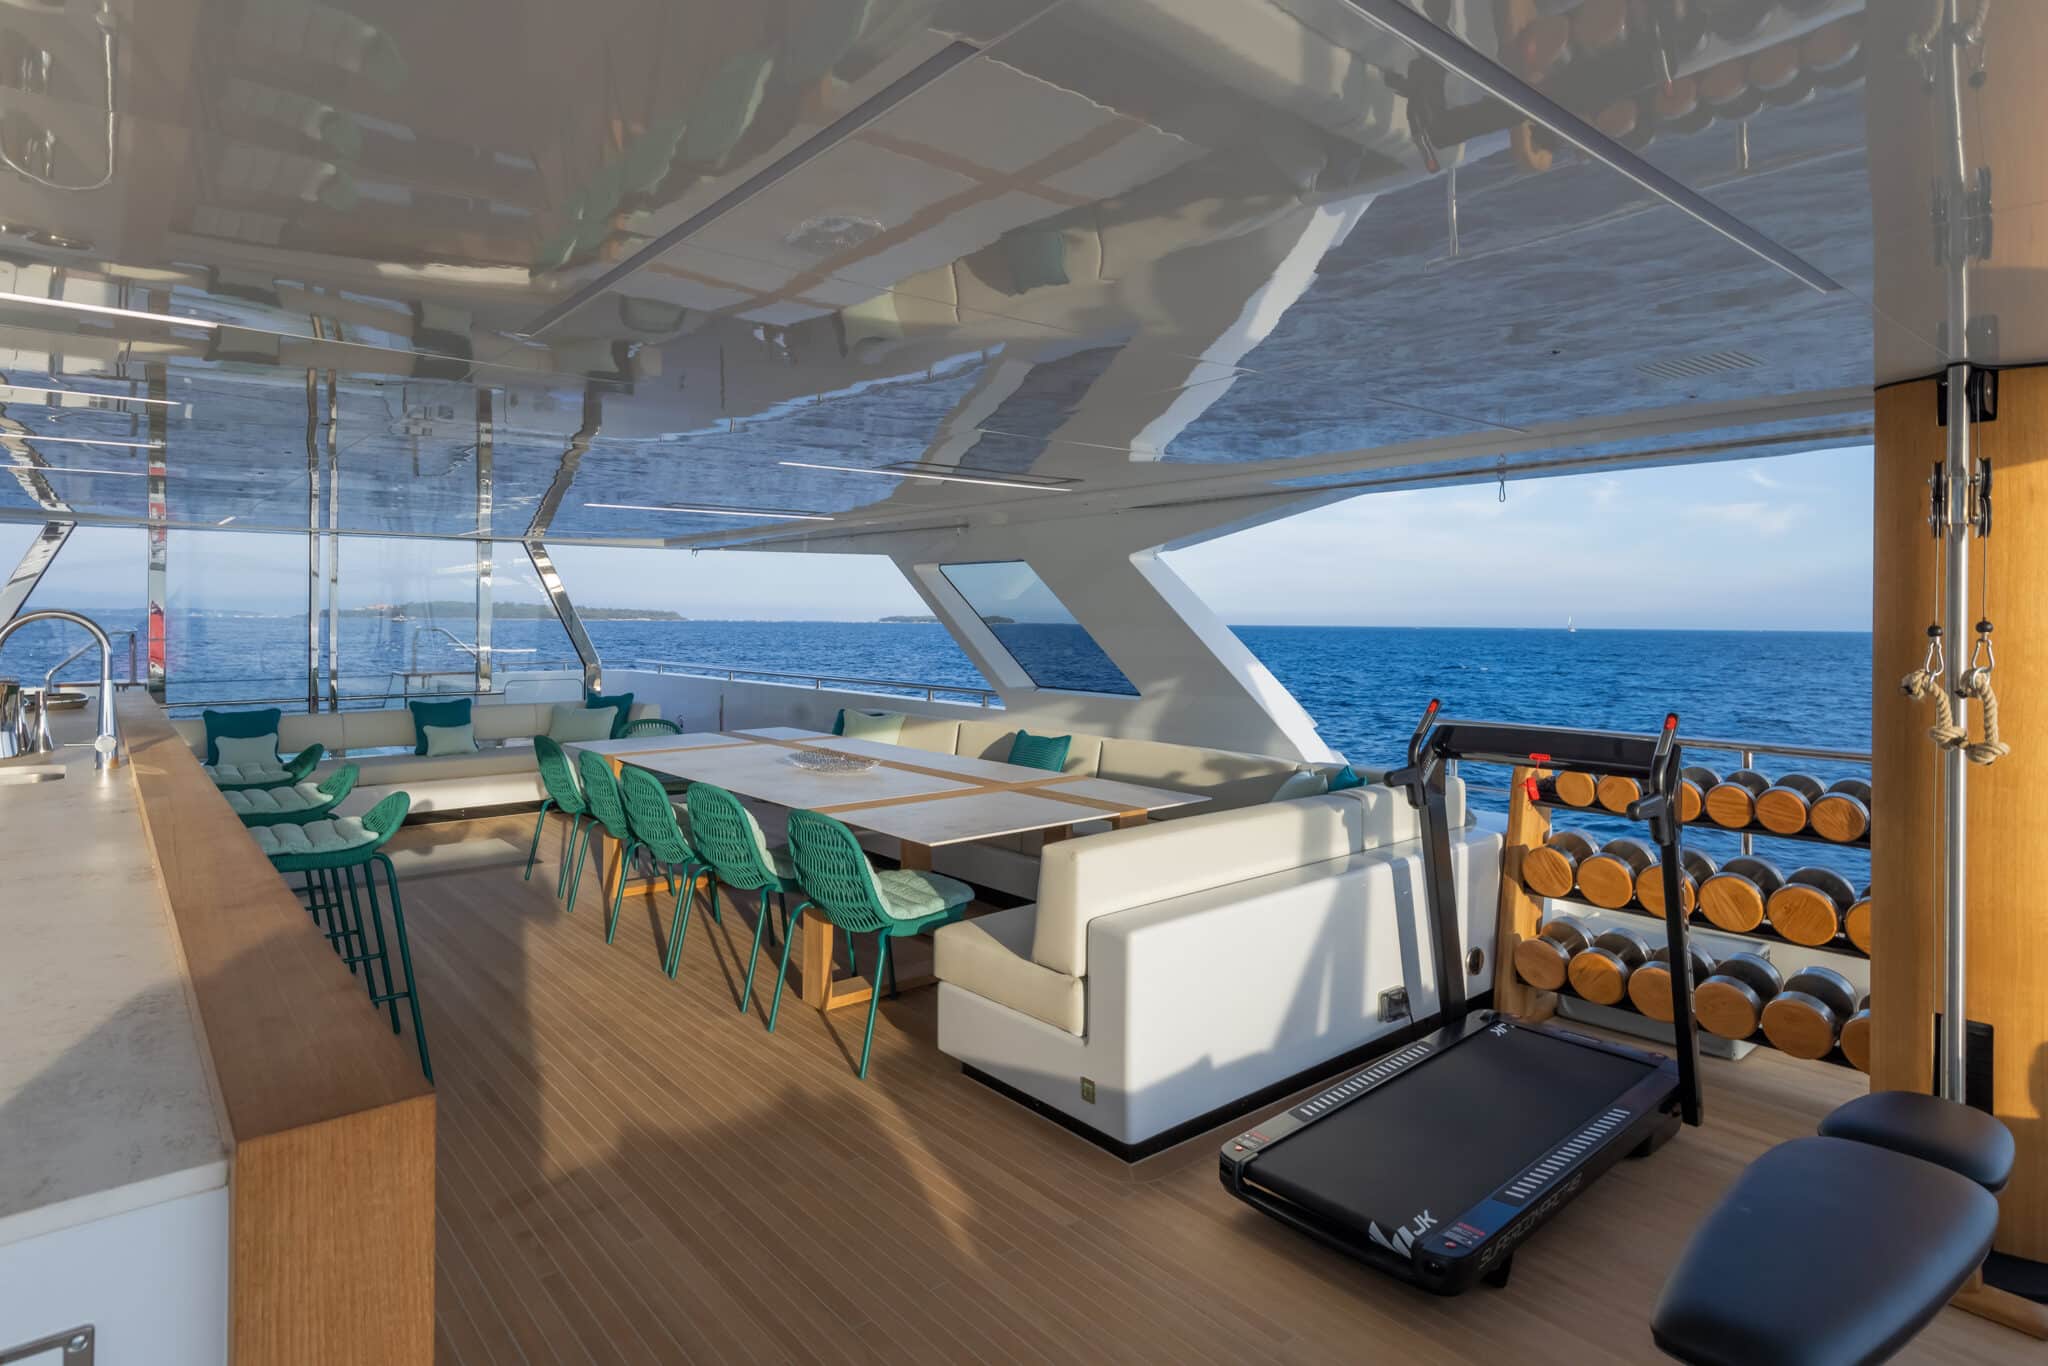 Emocean by Rosetti Super Yacht  - RSY 38M EXP EMOCEAN Sundeck 01 scaled 231